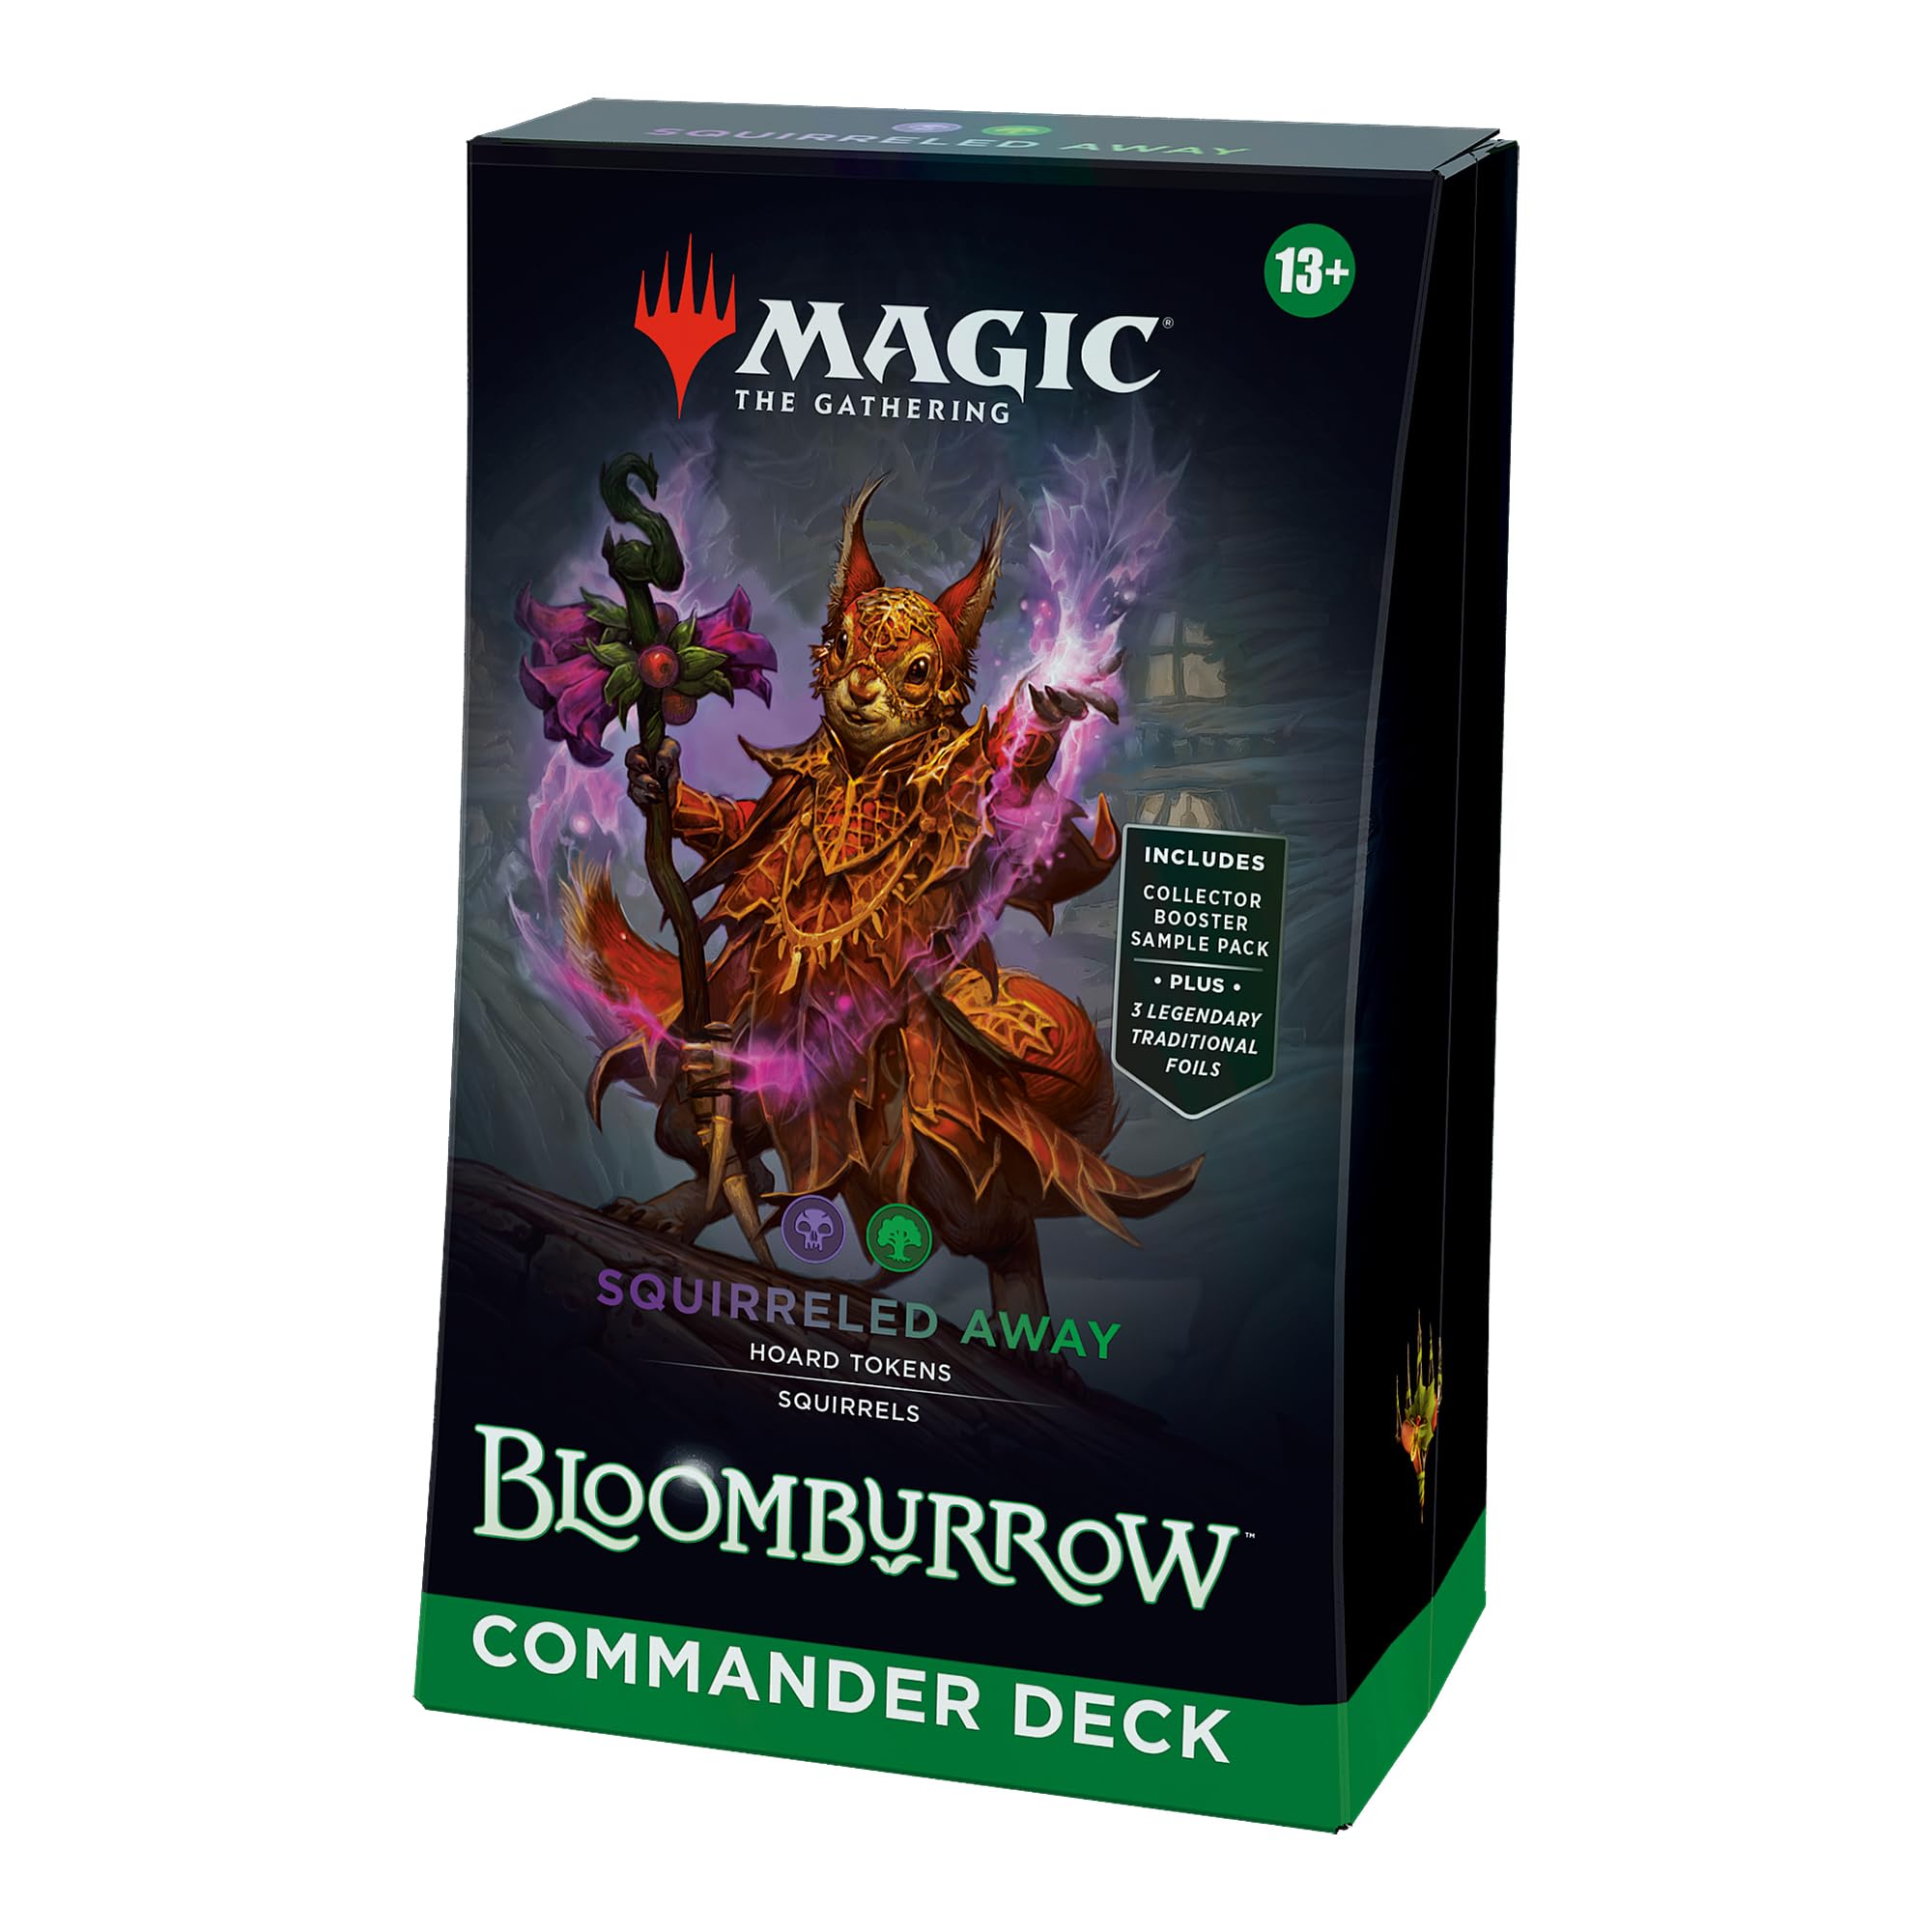 Magic: The Gathering Bloomburrow Commander Deck - Squirreled Away (100-Card Deck, 2-Card Collector Booster Sample Pack + Accessories)